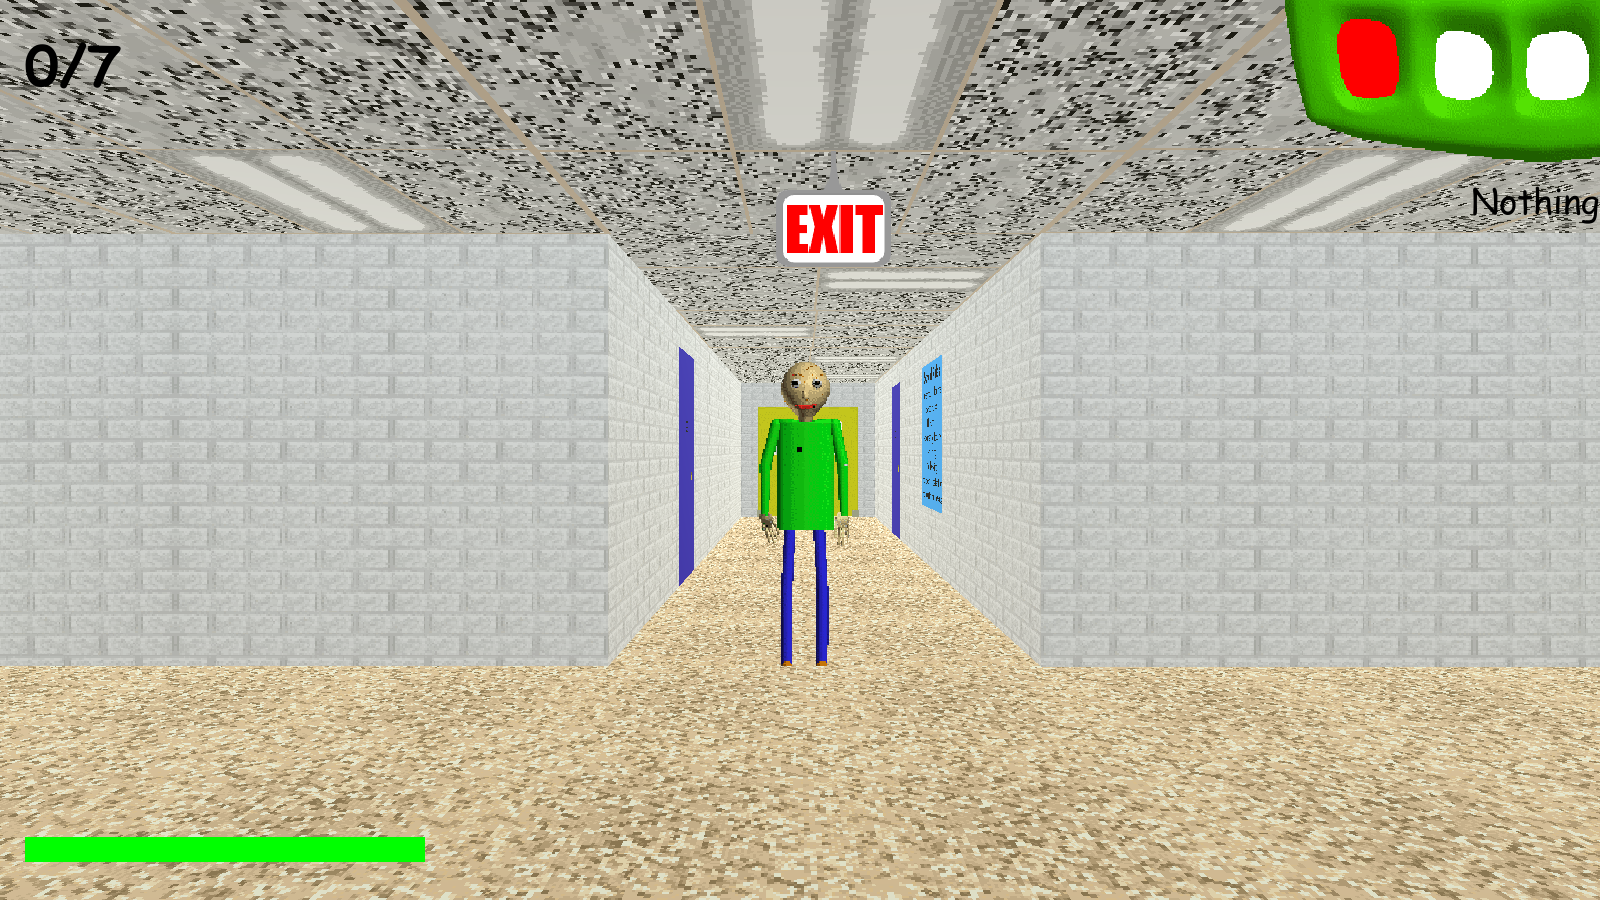 Learn Math and the Meaning of Fear in Baldi's Basics